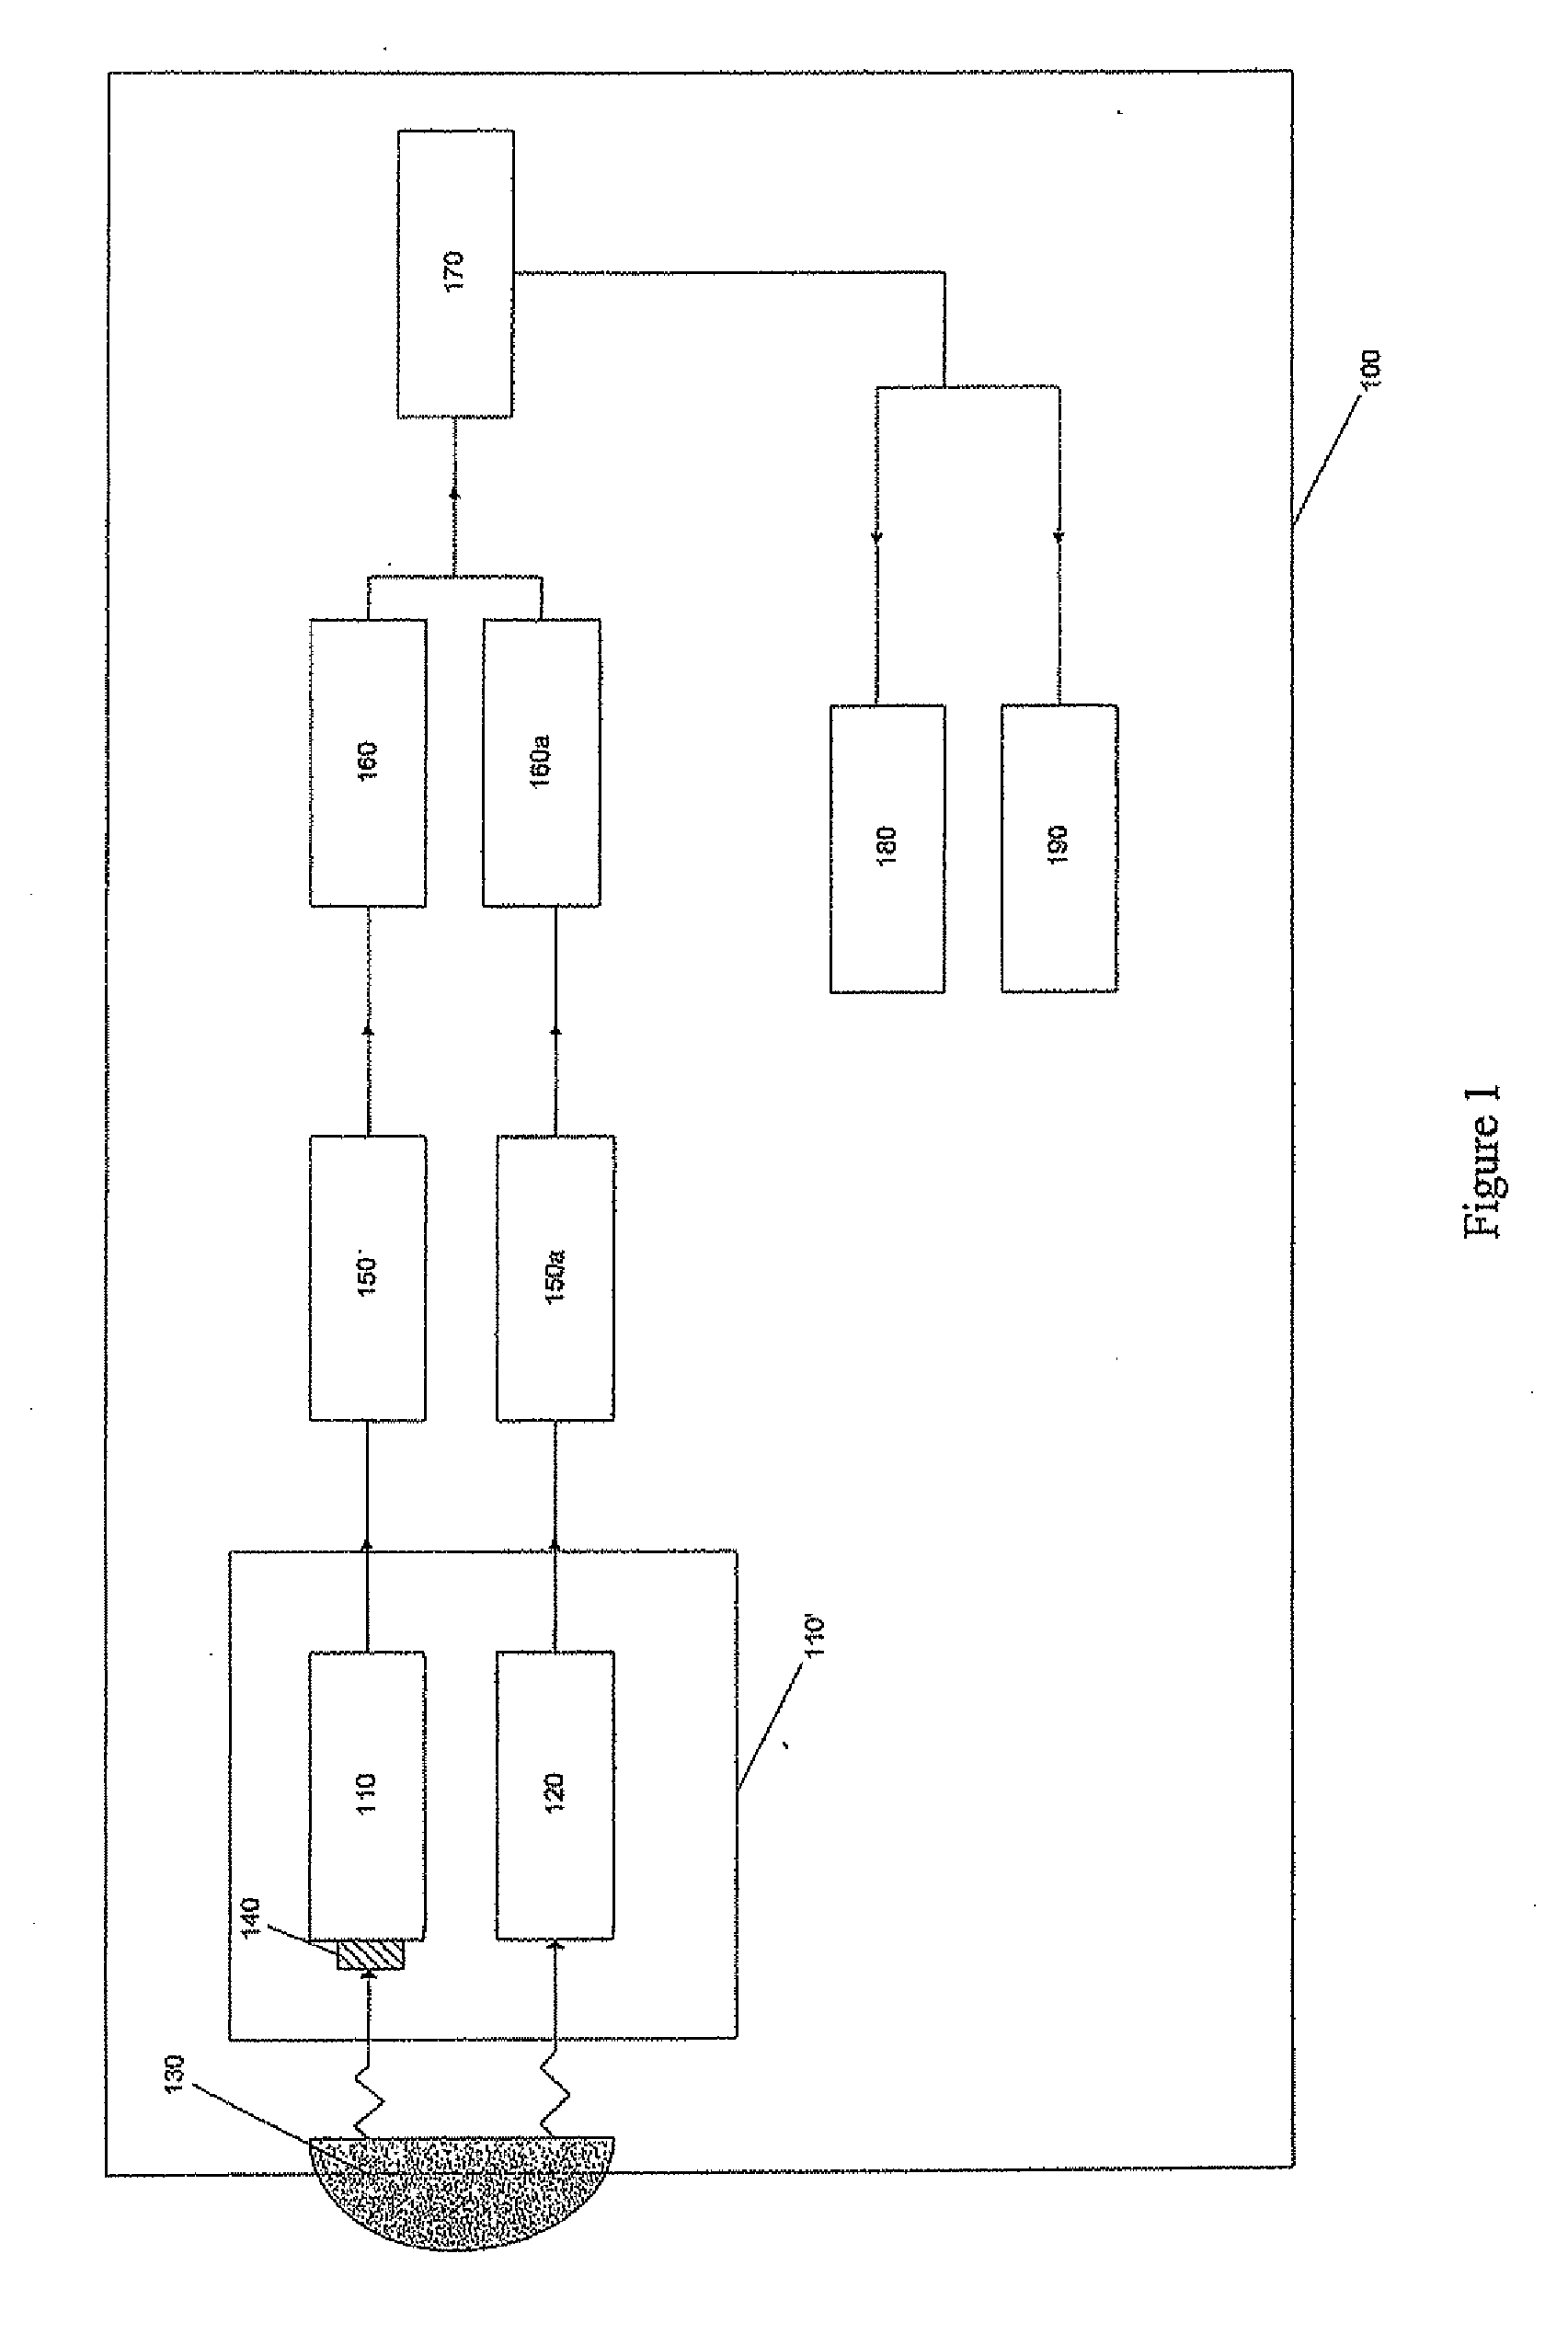 Motion detector for detecting tampering and method for detecting tampering